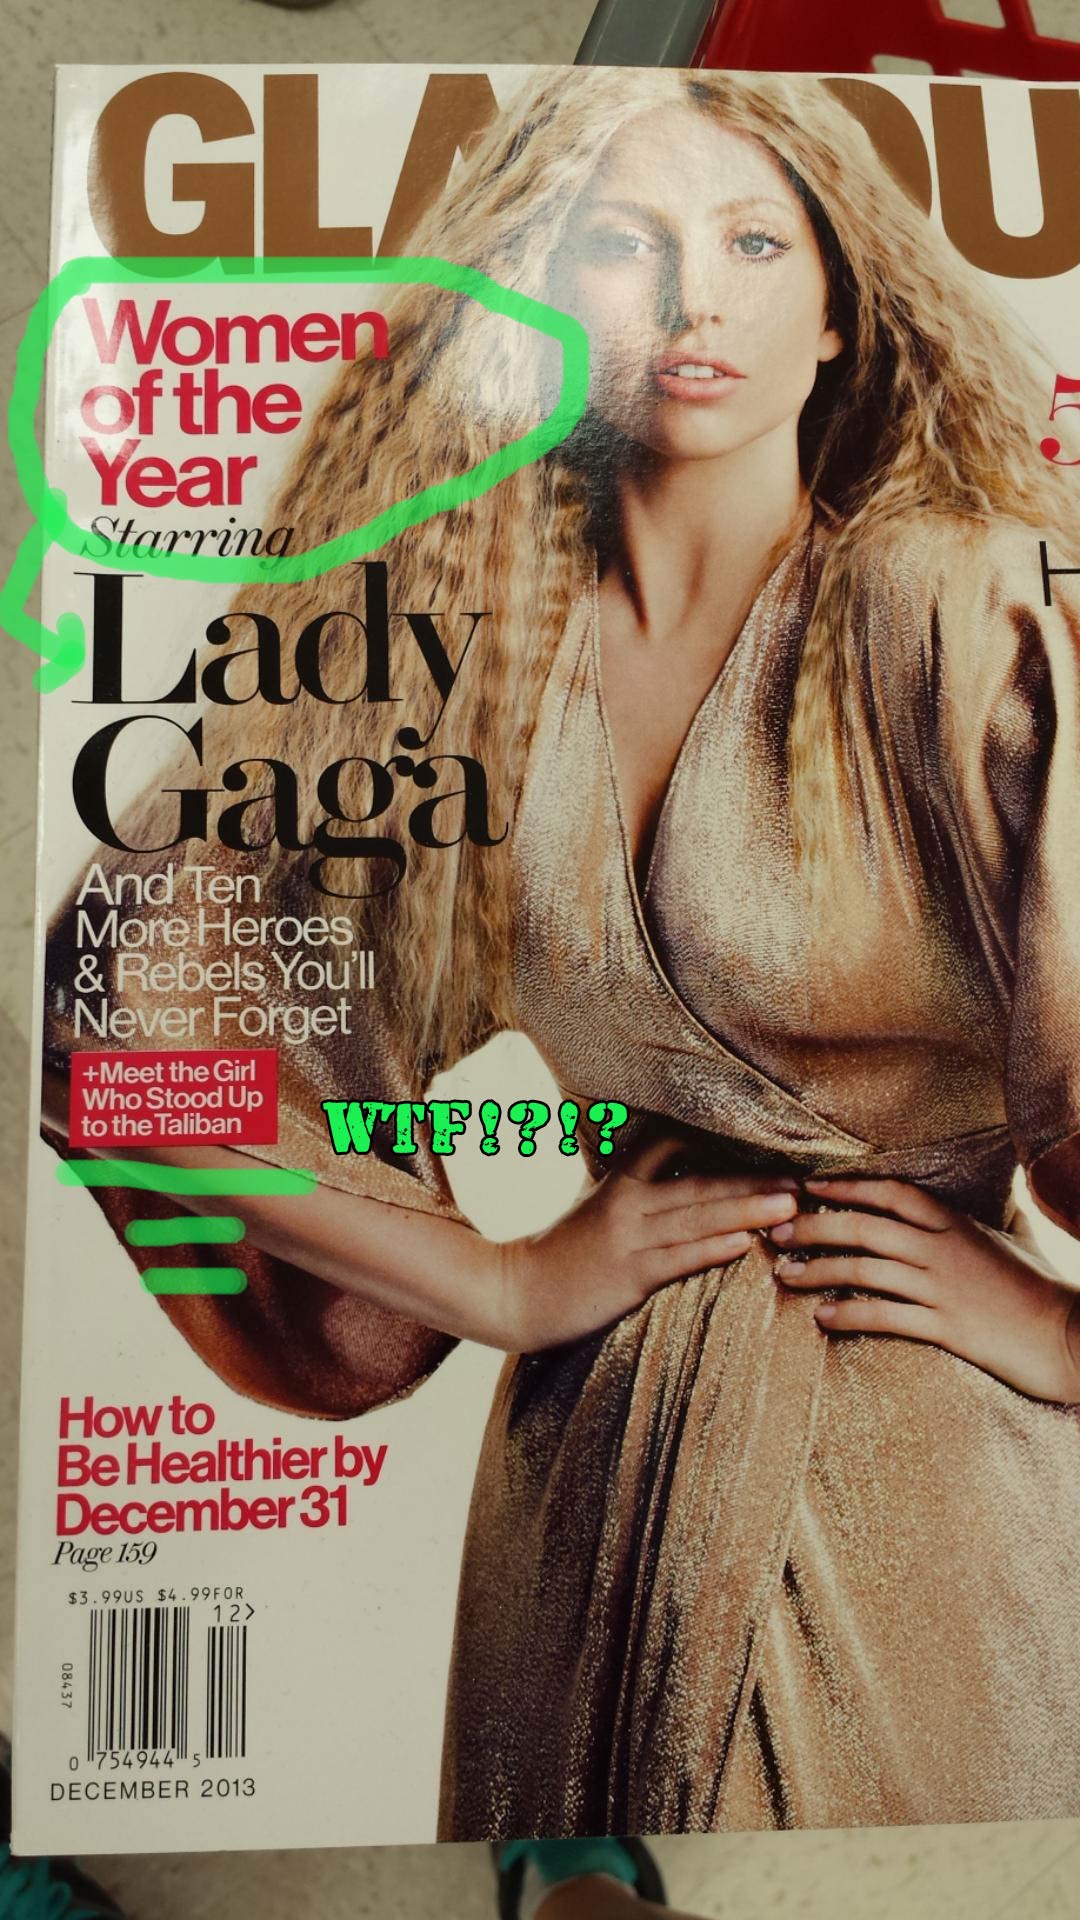 glamour 2013 lady gaga cover - Gu Women of the Year Starring Lady Gaga And Ten More Heroes & Rebels You'll Never Forget Meet the Girl Who Stood Up to the Taliban Tms 99922 How to Be Healthier by December 31 Page 159 $3.99US $4.99FOR Ii 12> 08437